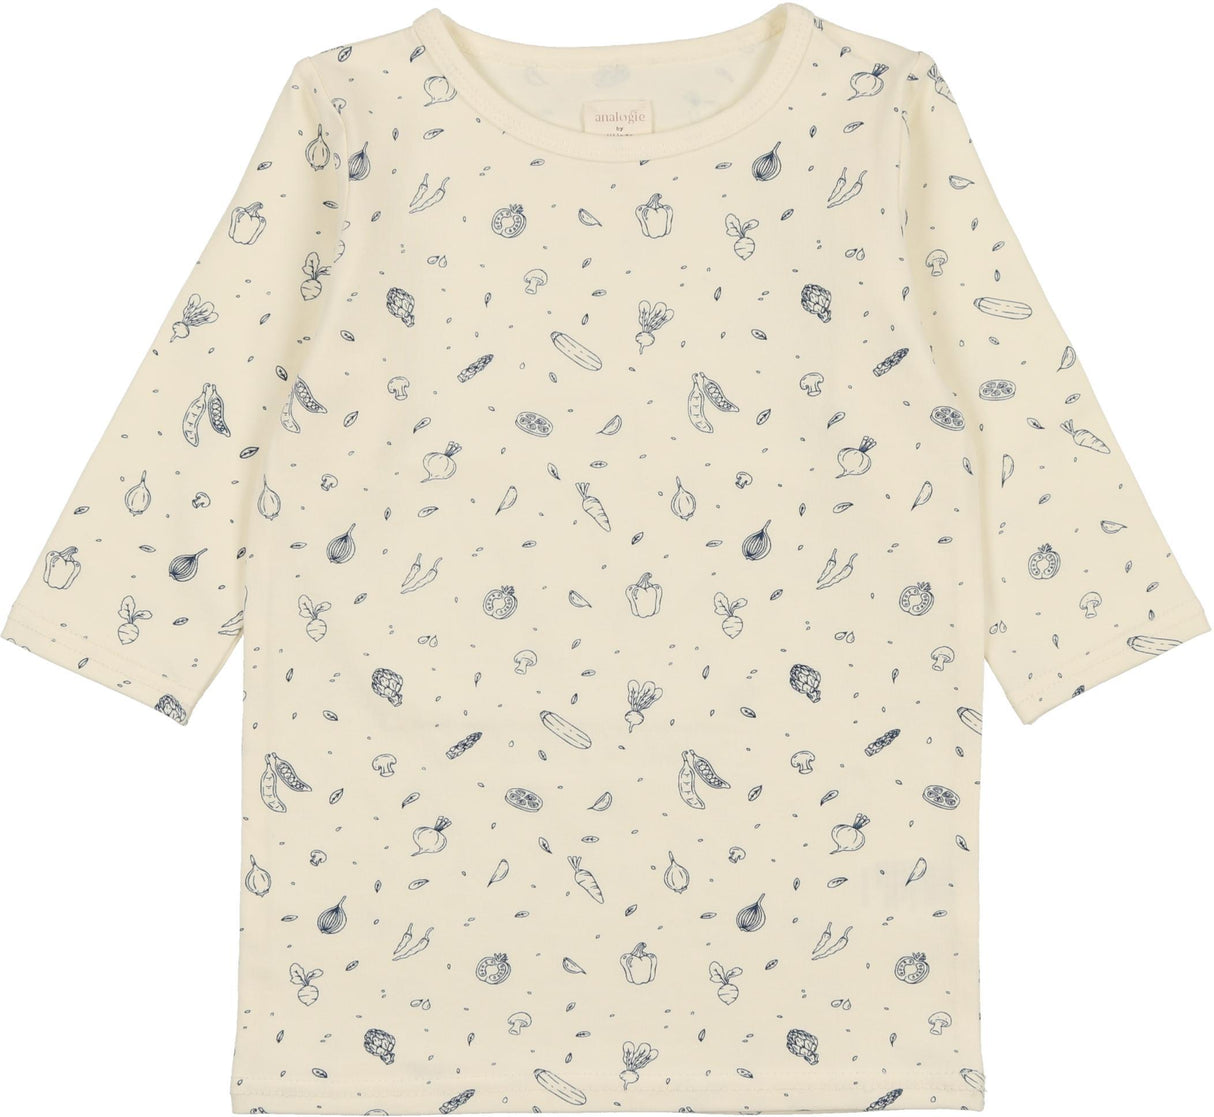 Analogie by Lil Legs Multigarden Collection Girls 3/4 Sleeve T-shirt Tee